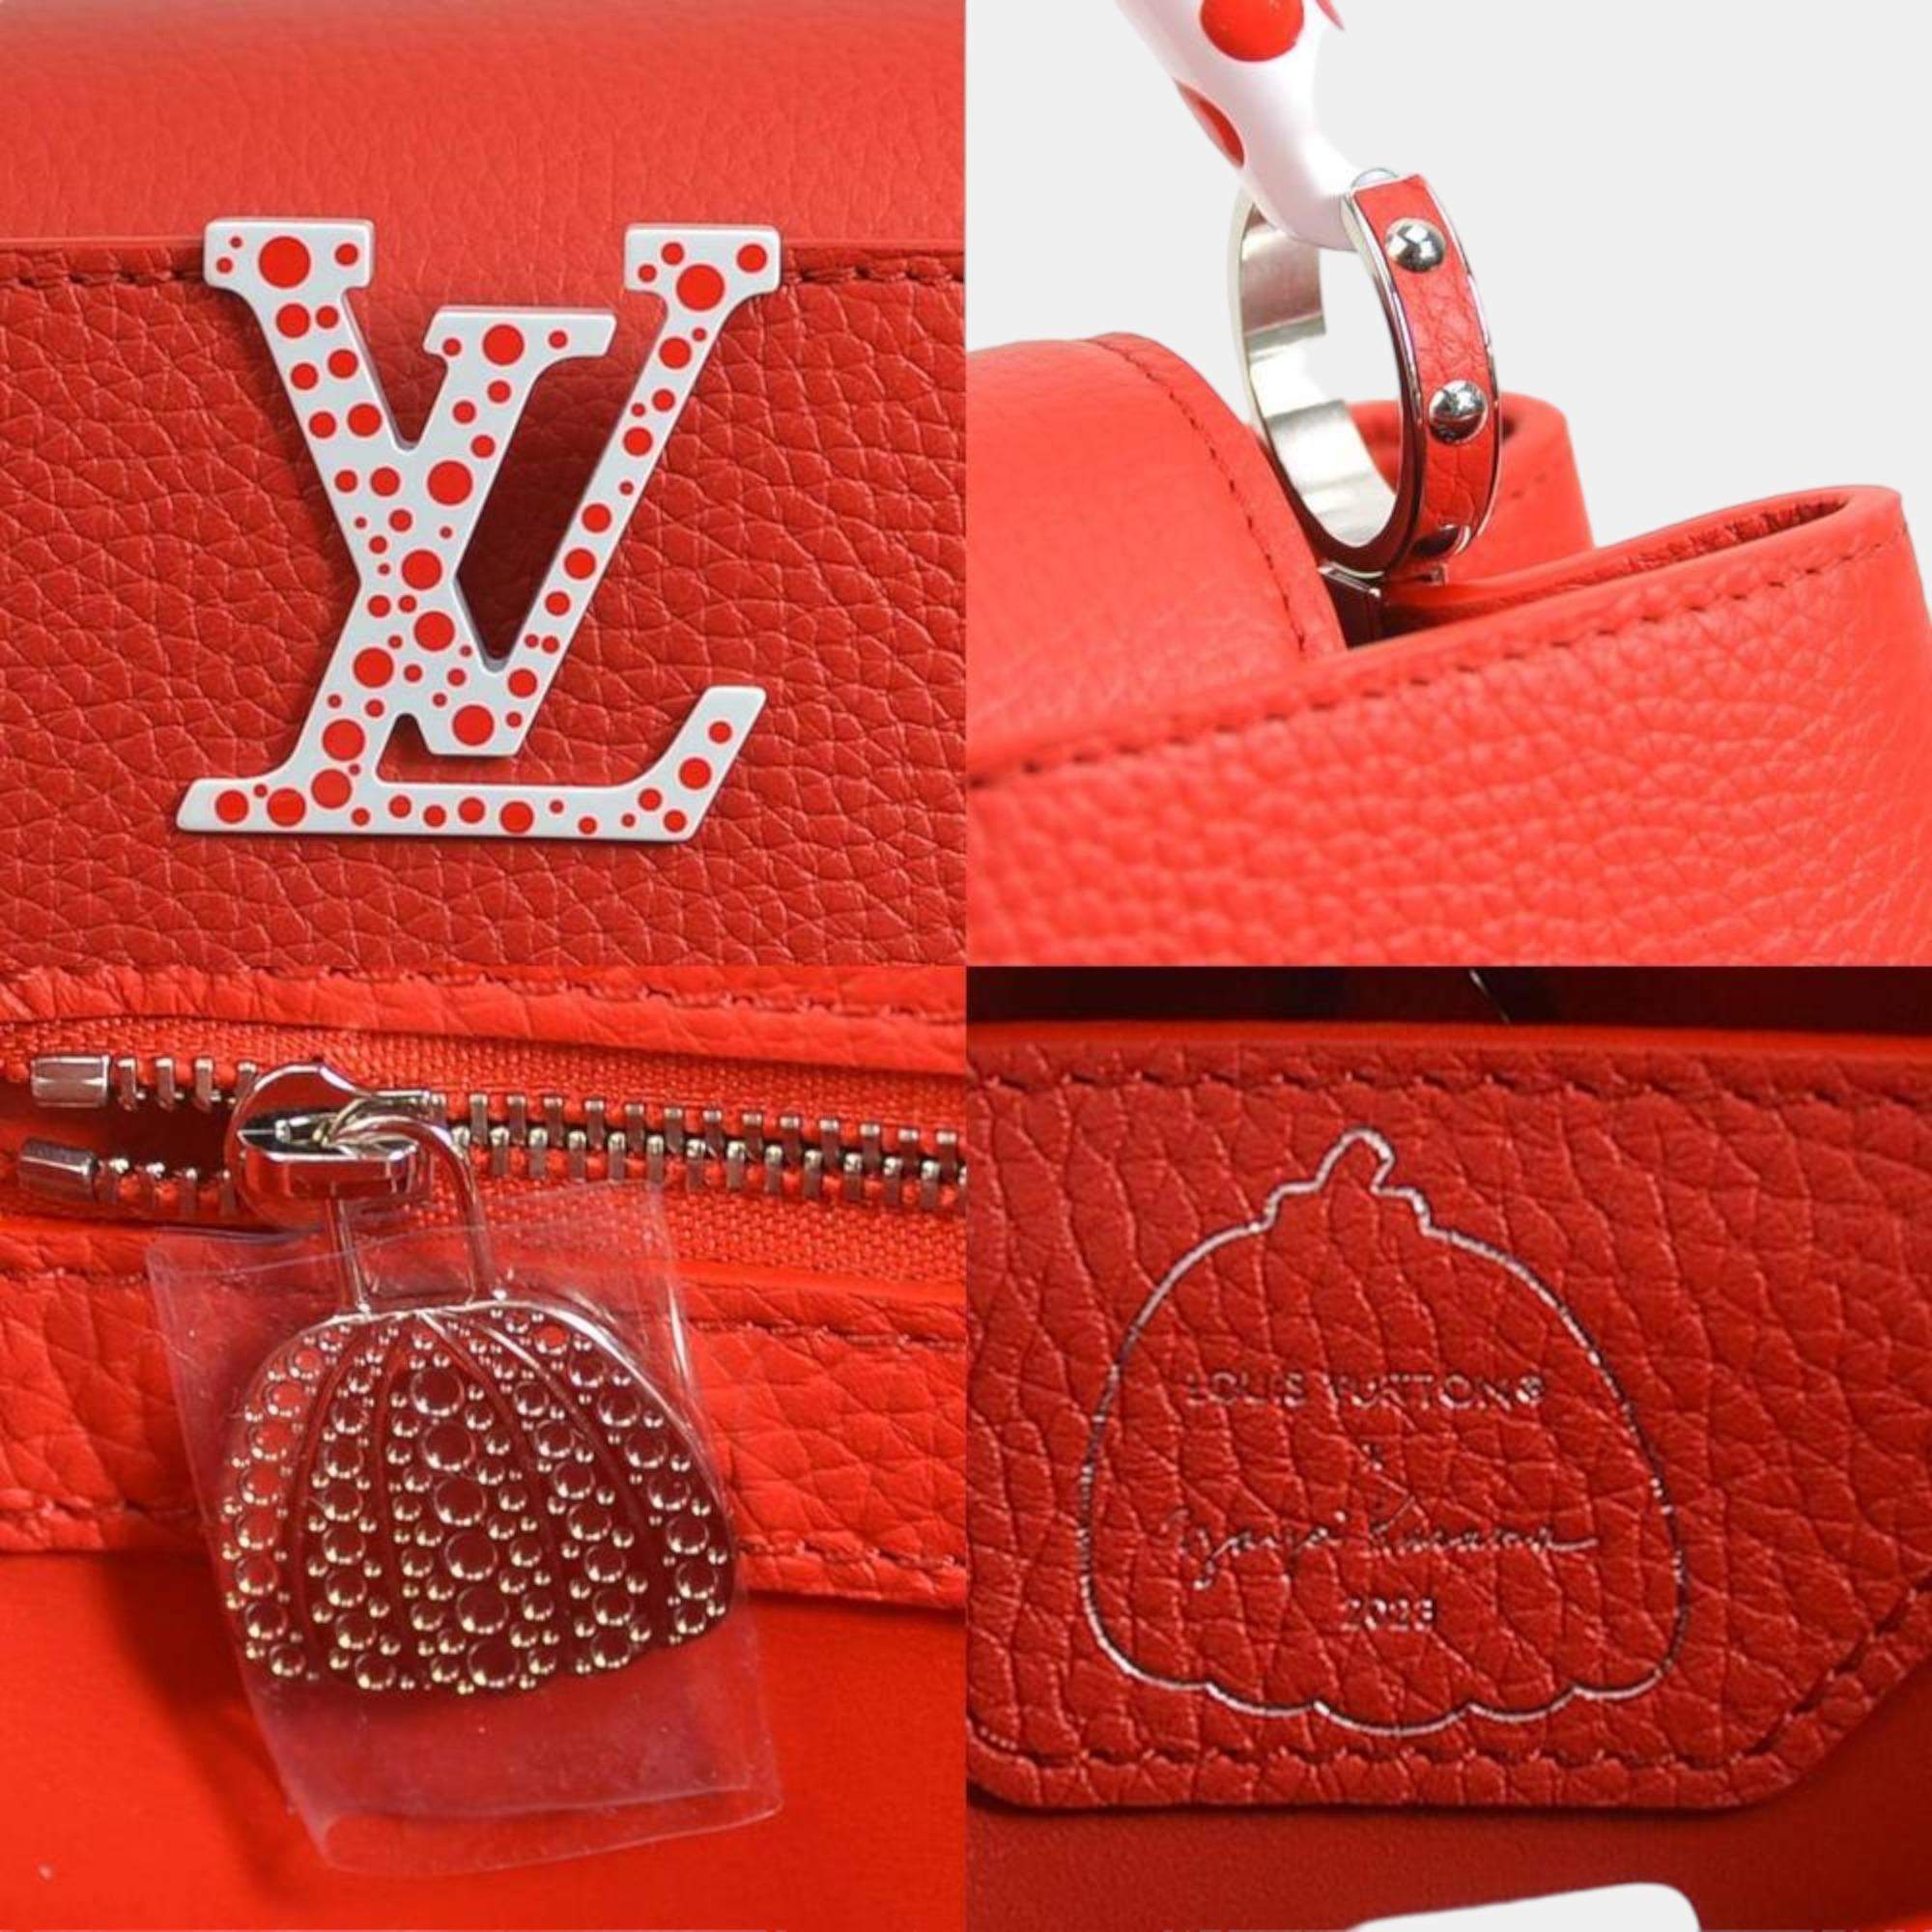 Louis Vuitton Bag Capucines BB Red/White by Yayoi Kusama – YangGallery